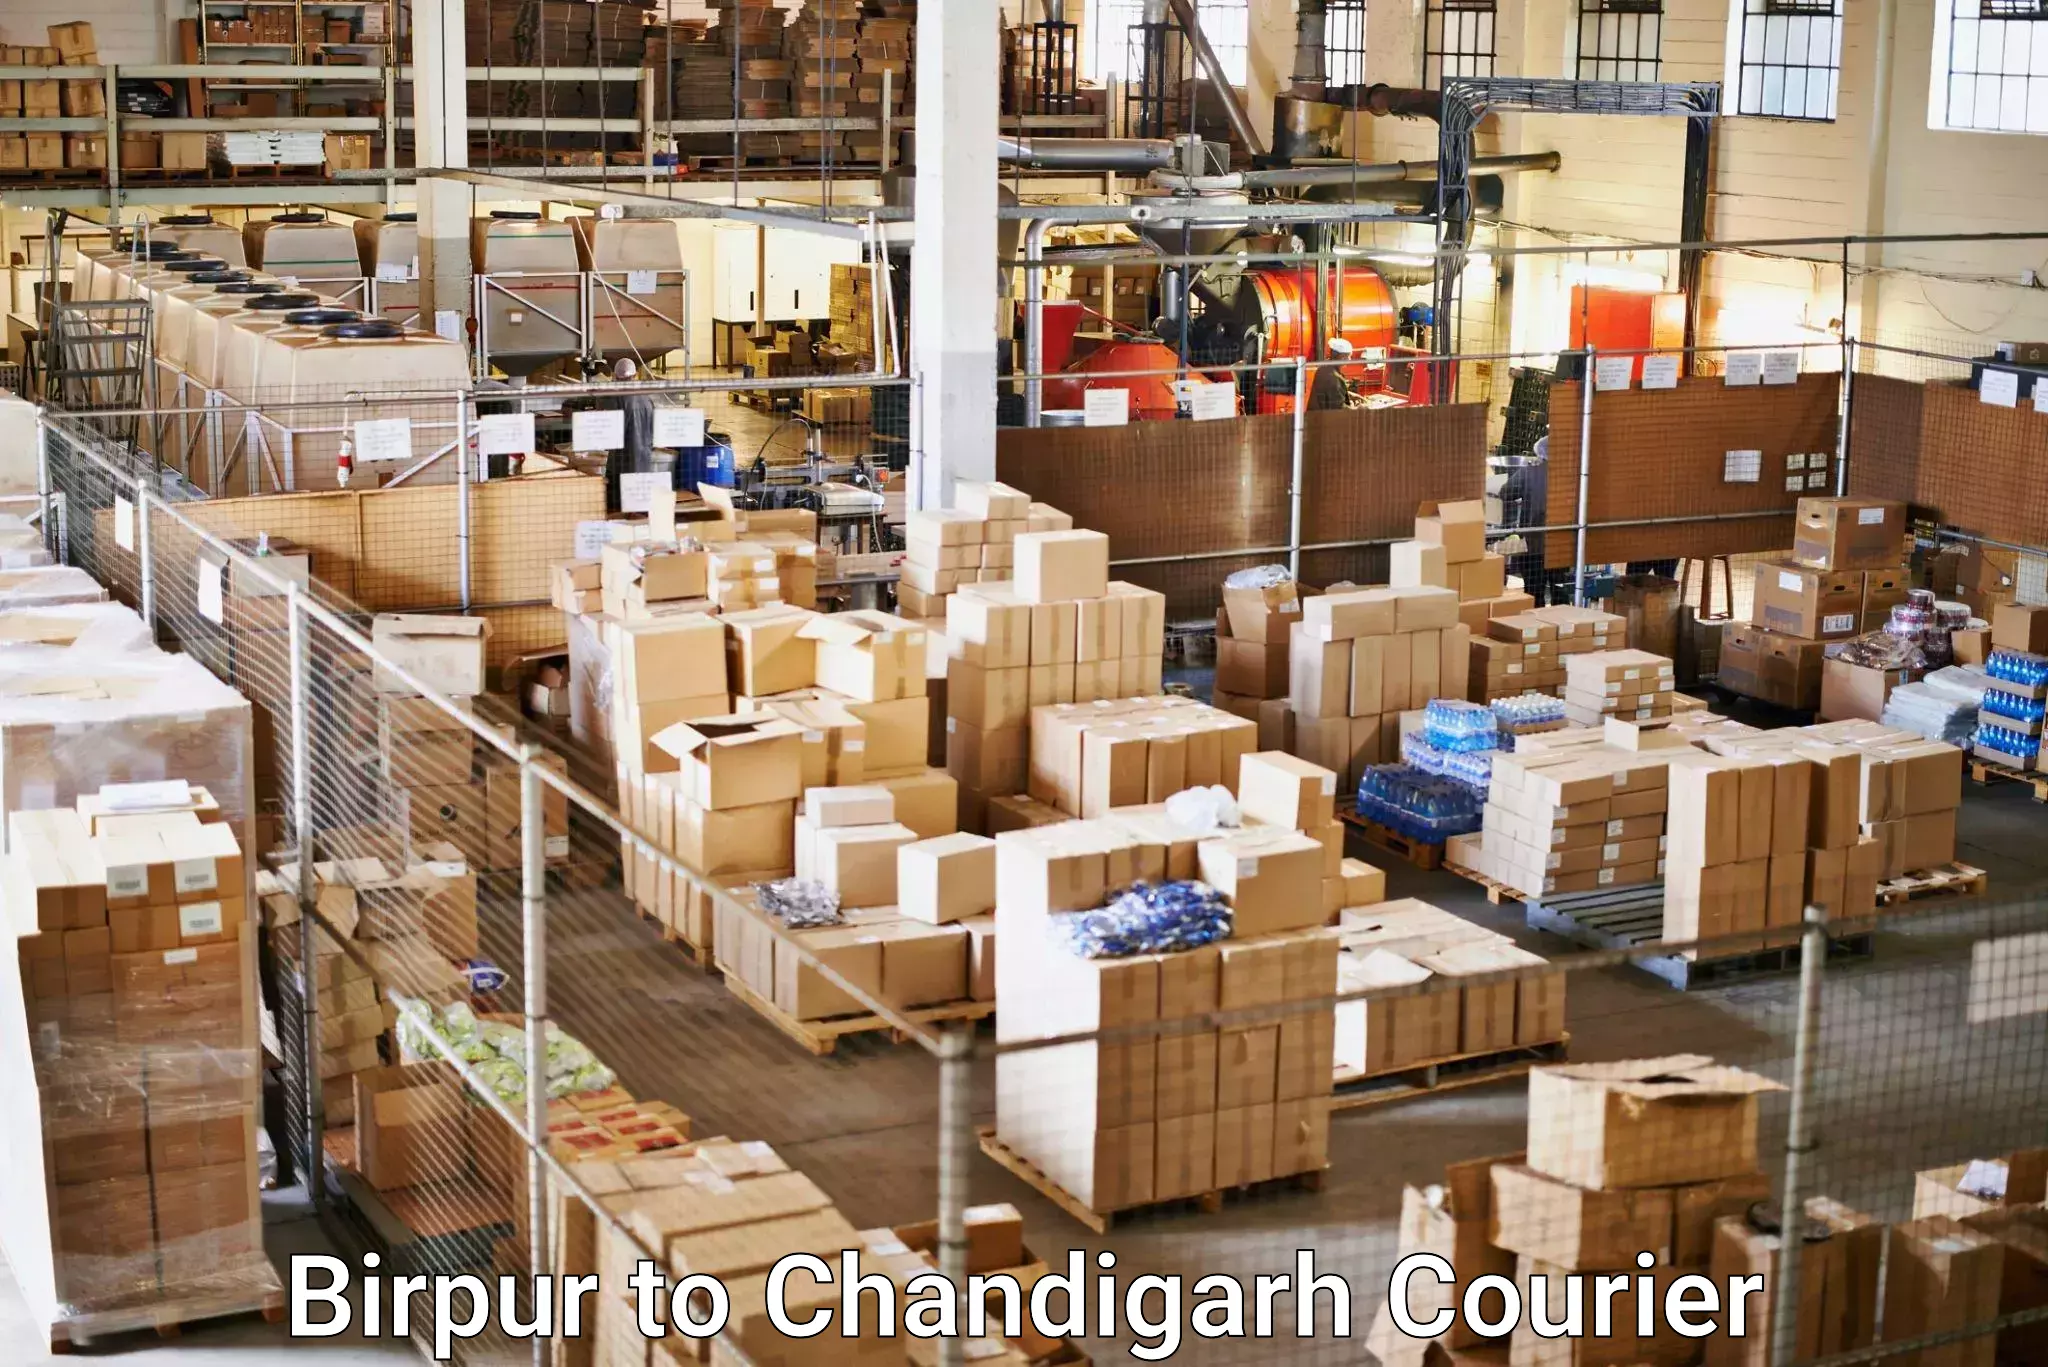 Long distance courier Birpur to Chandigarh